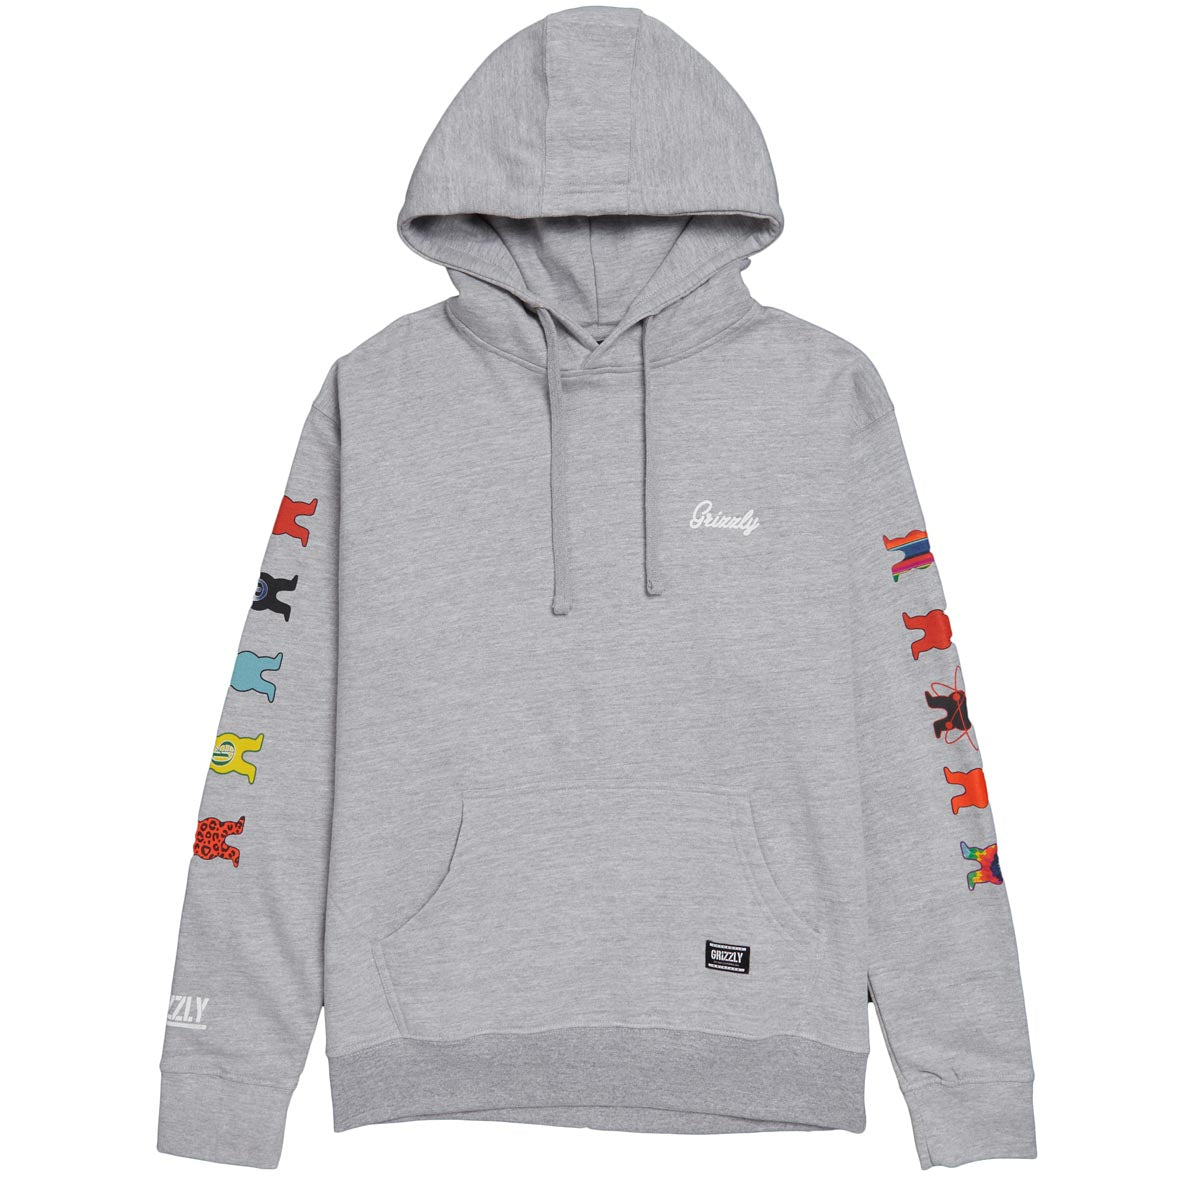 Grizzly Rolling Deep Hoodie - Heather Grey image 2